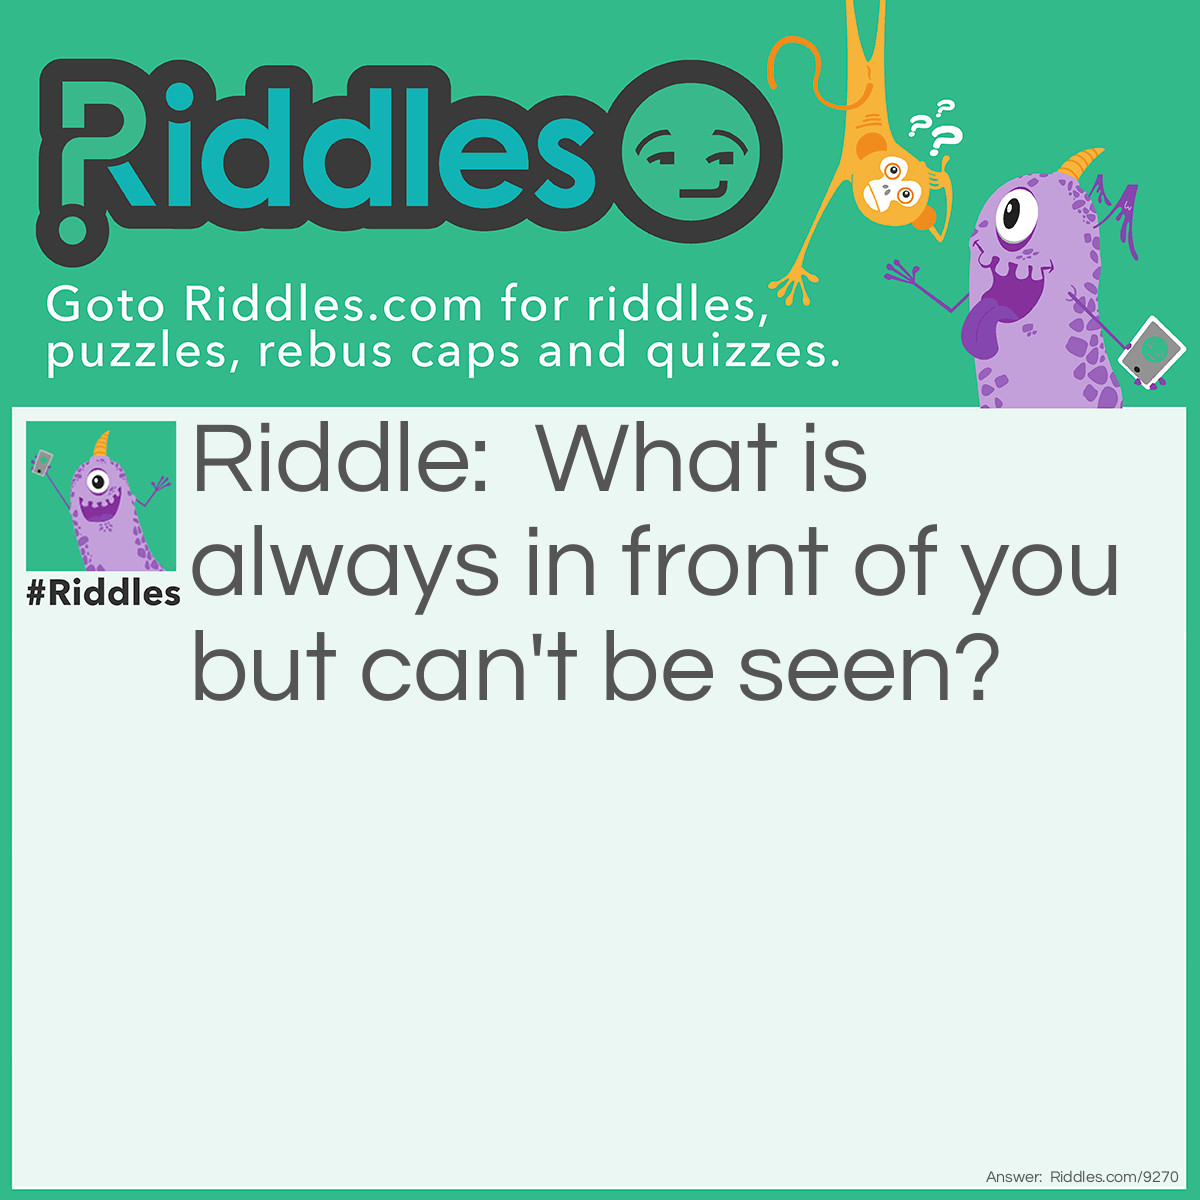 Riddle: What is always in front of you but can't be seen? Answer: Your Future